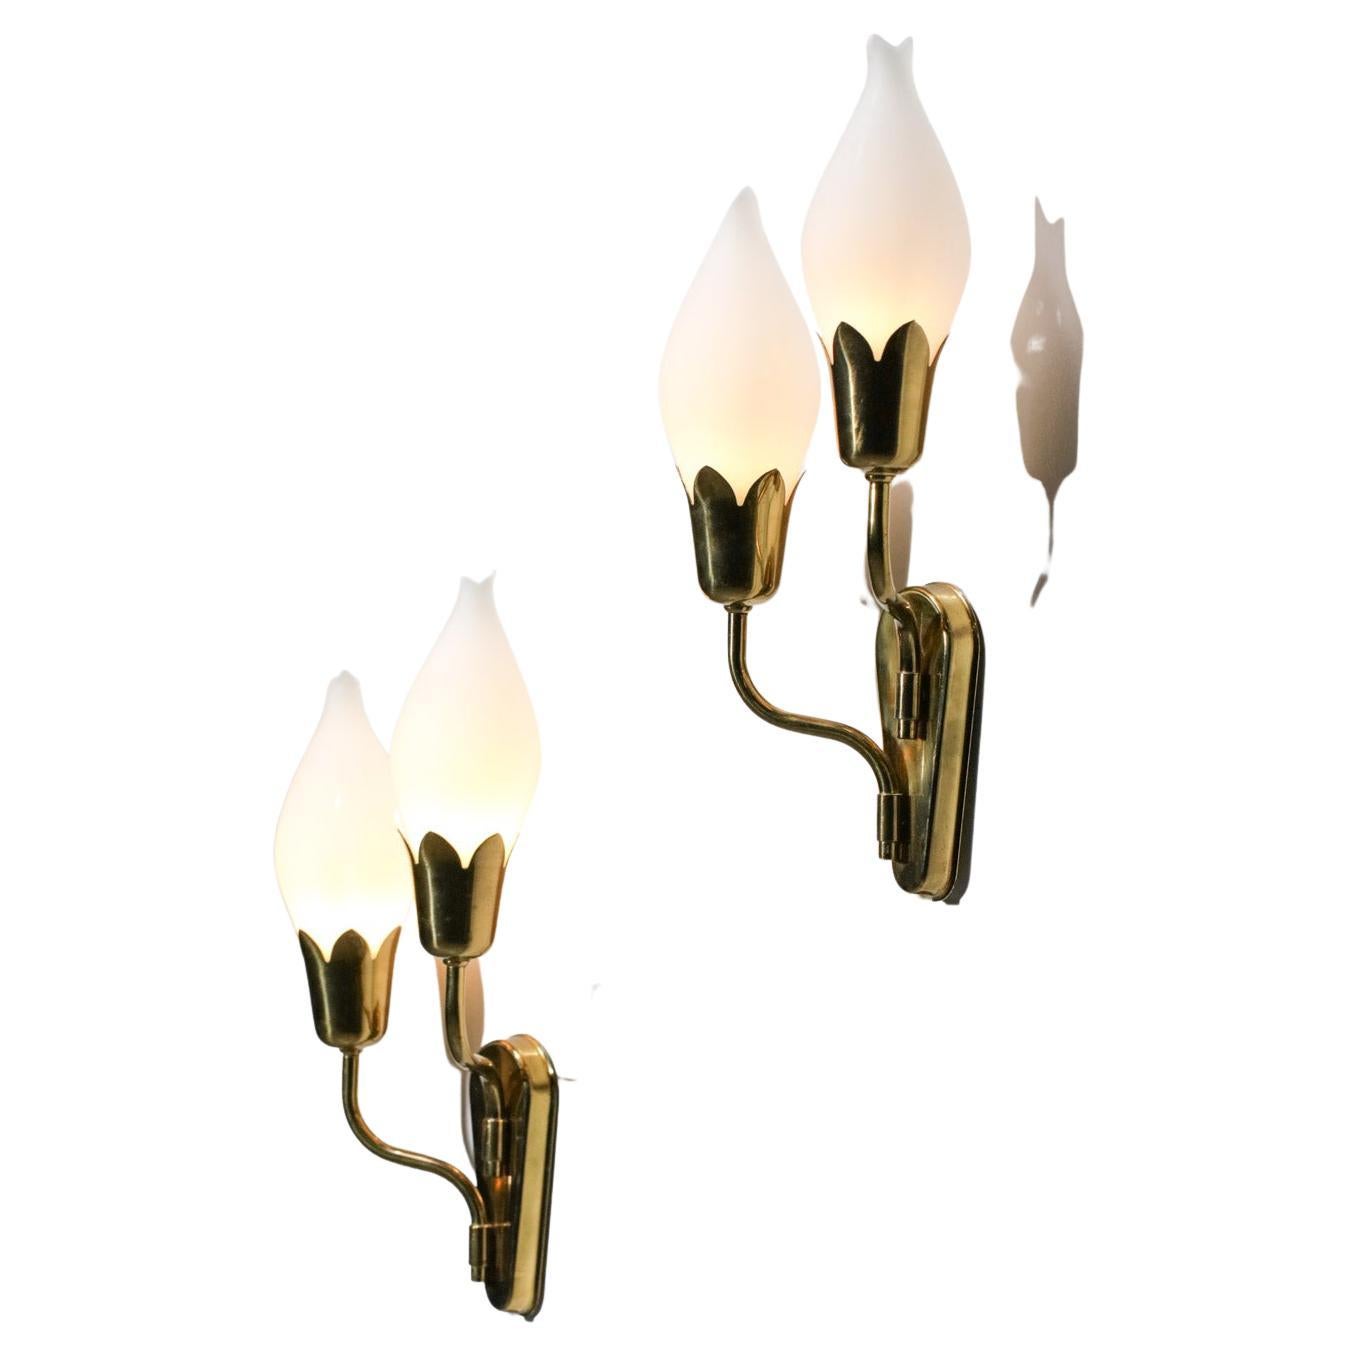 Pair of Tulip Sconces with Opaline and Brass from Fog & Morup Swedish Design